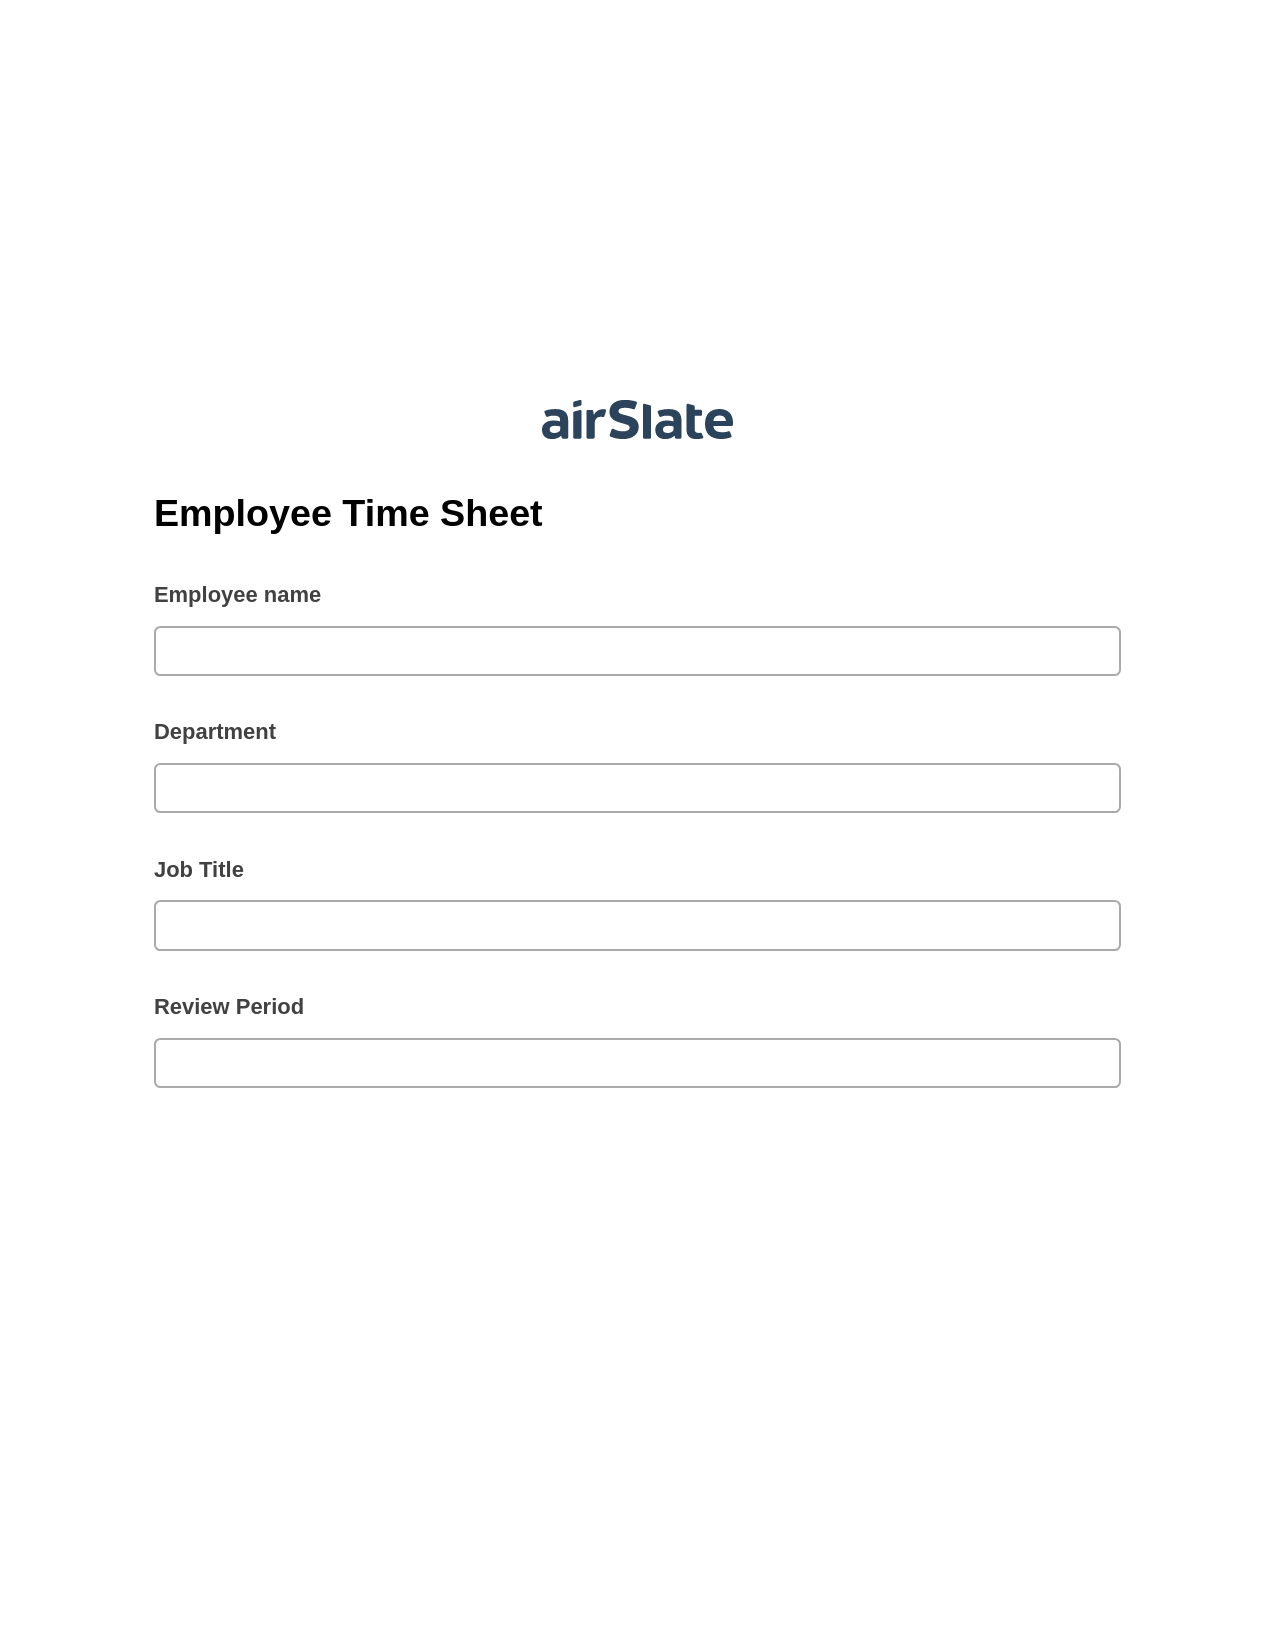 Employee Time Sheet Pre-fill from Salesforce Records with SOQL Bot, Create Salesforce Records Bot, Archive to Dropbox Bot